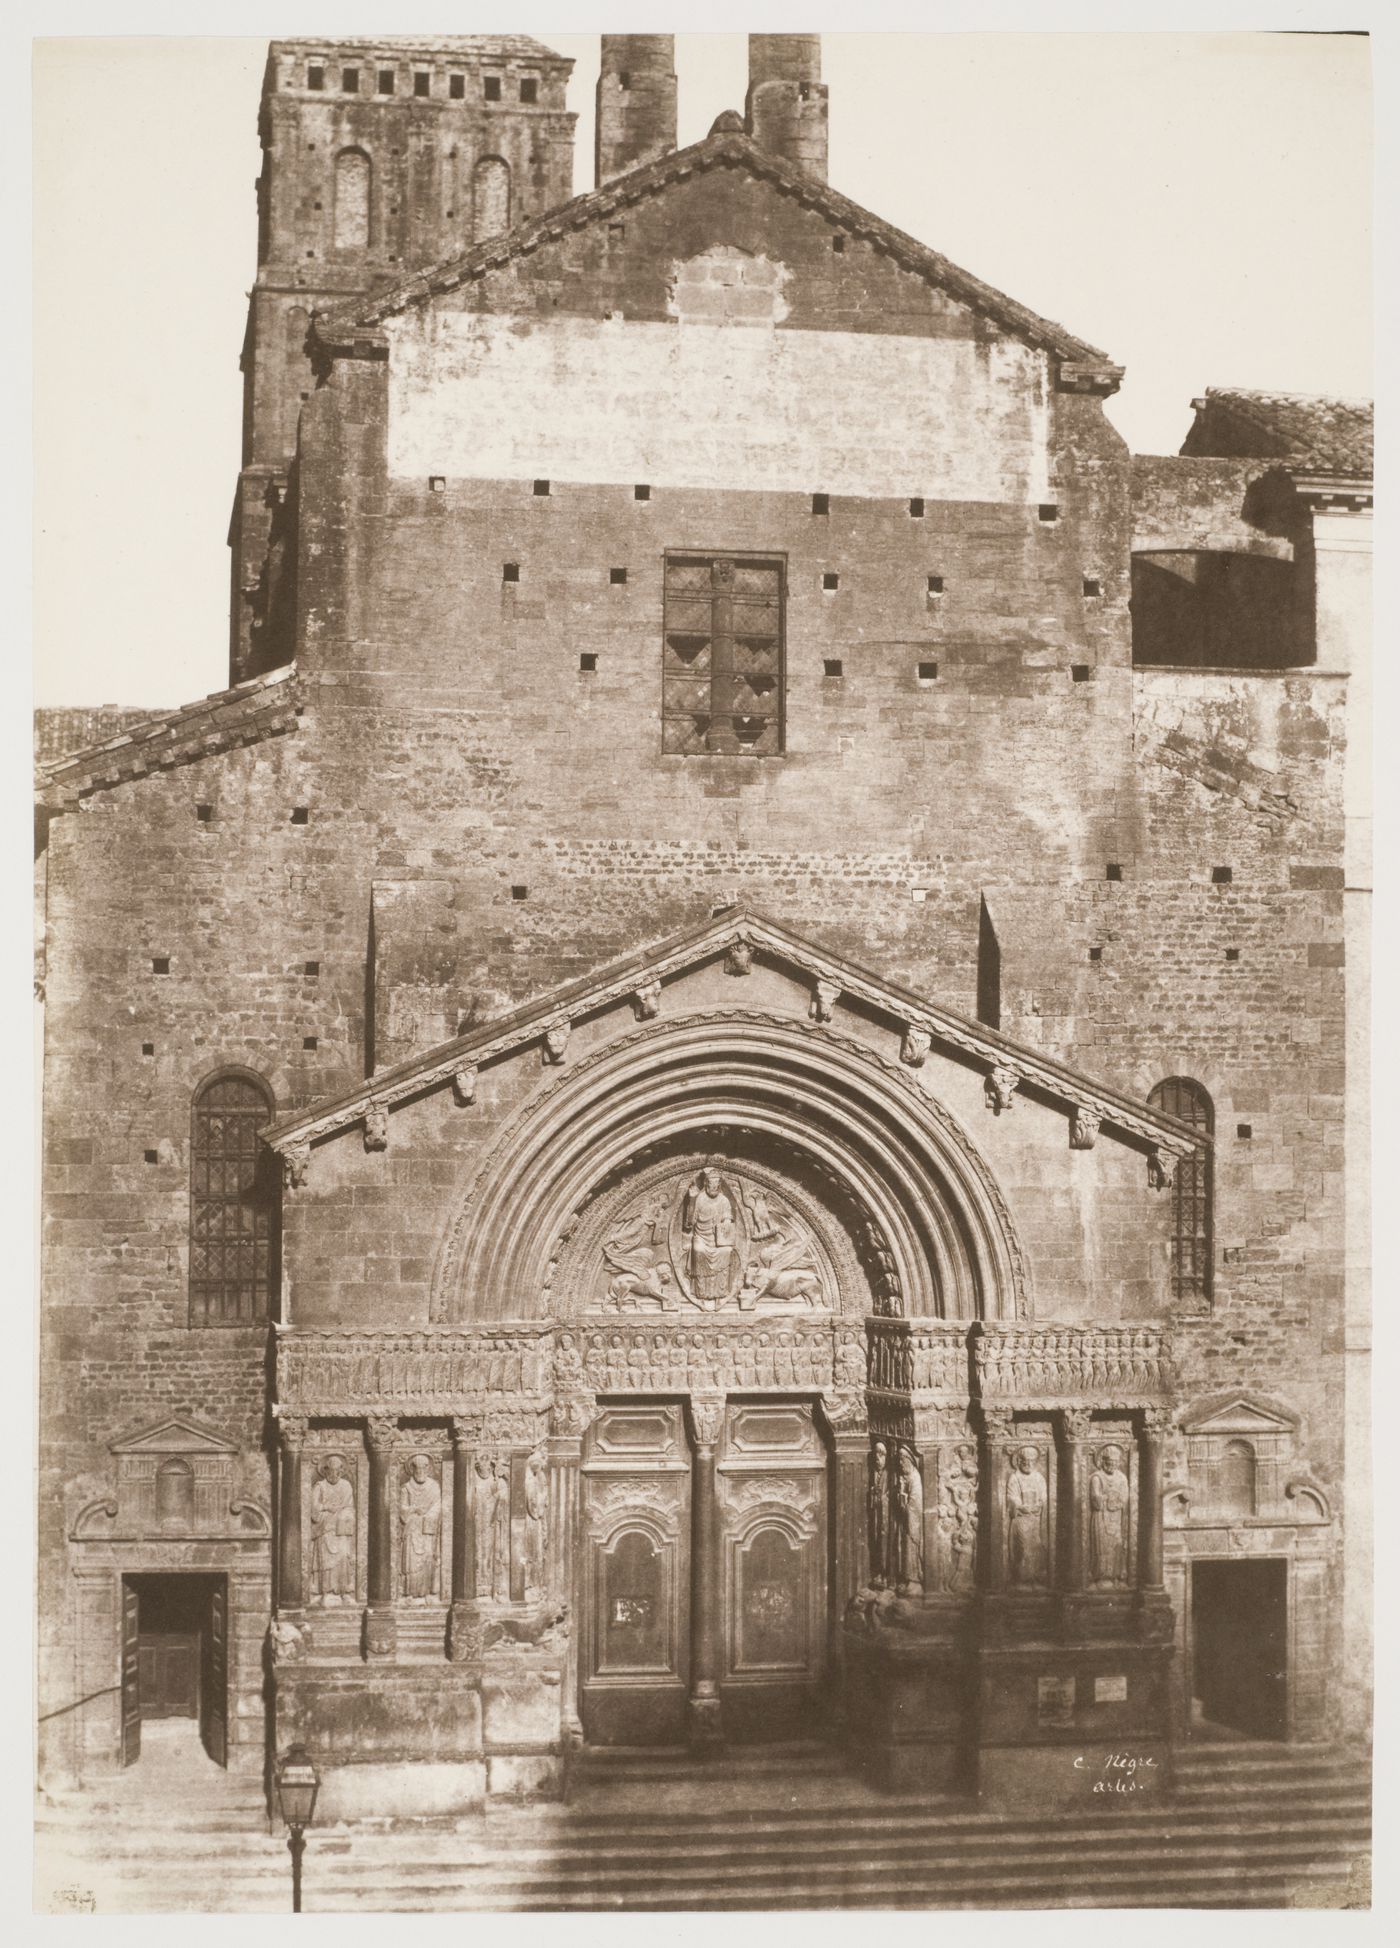 View of west façade of St. Trophime, Arles, France